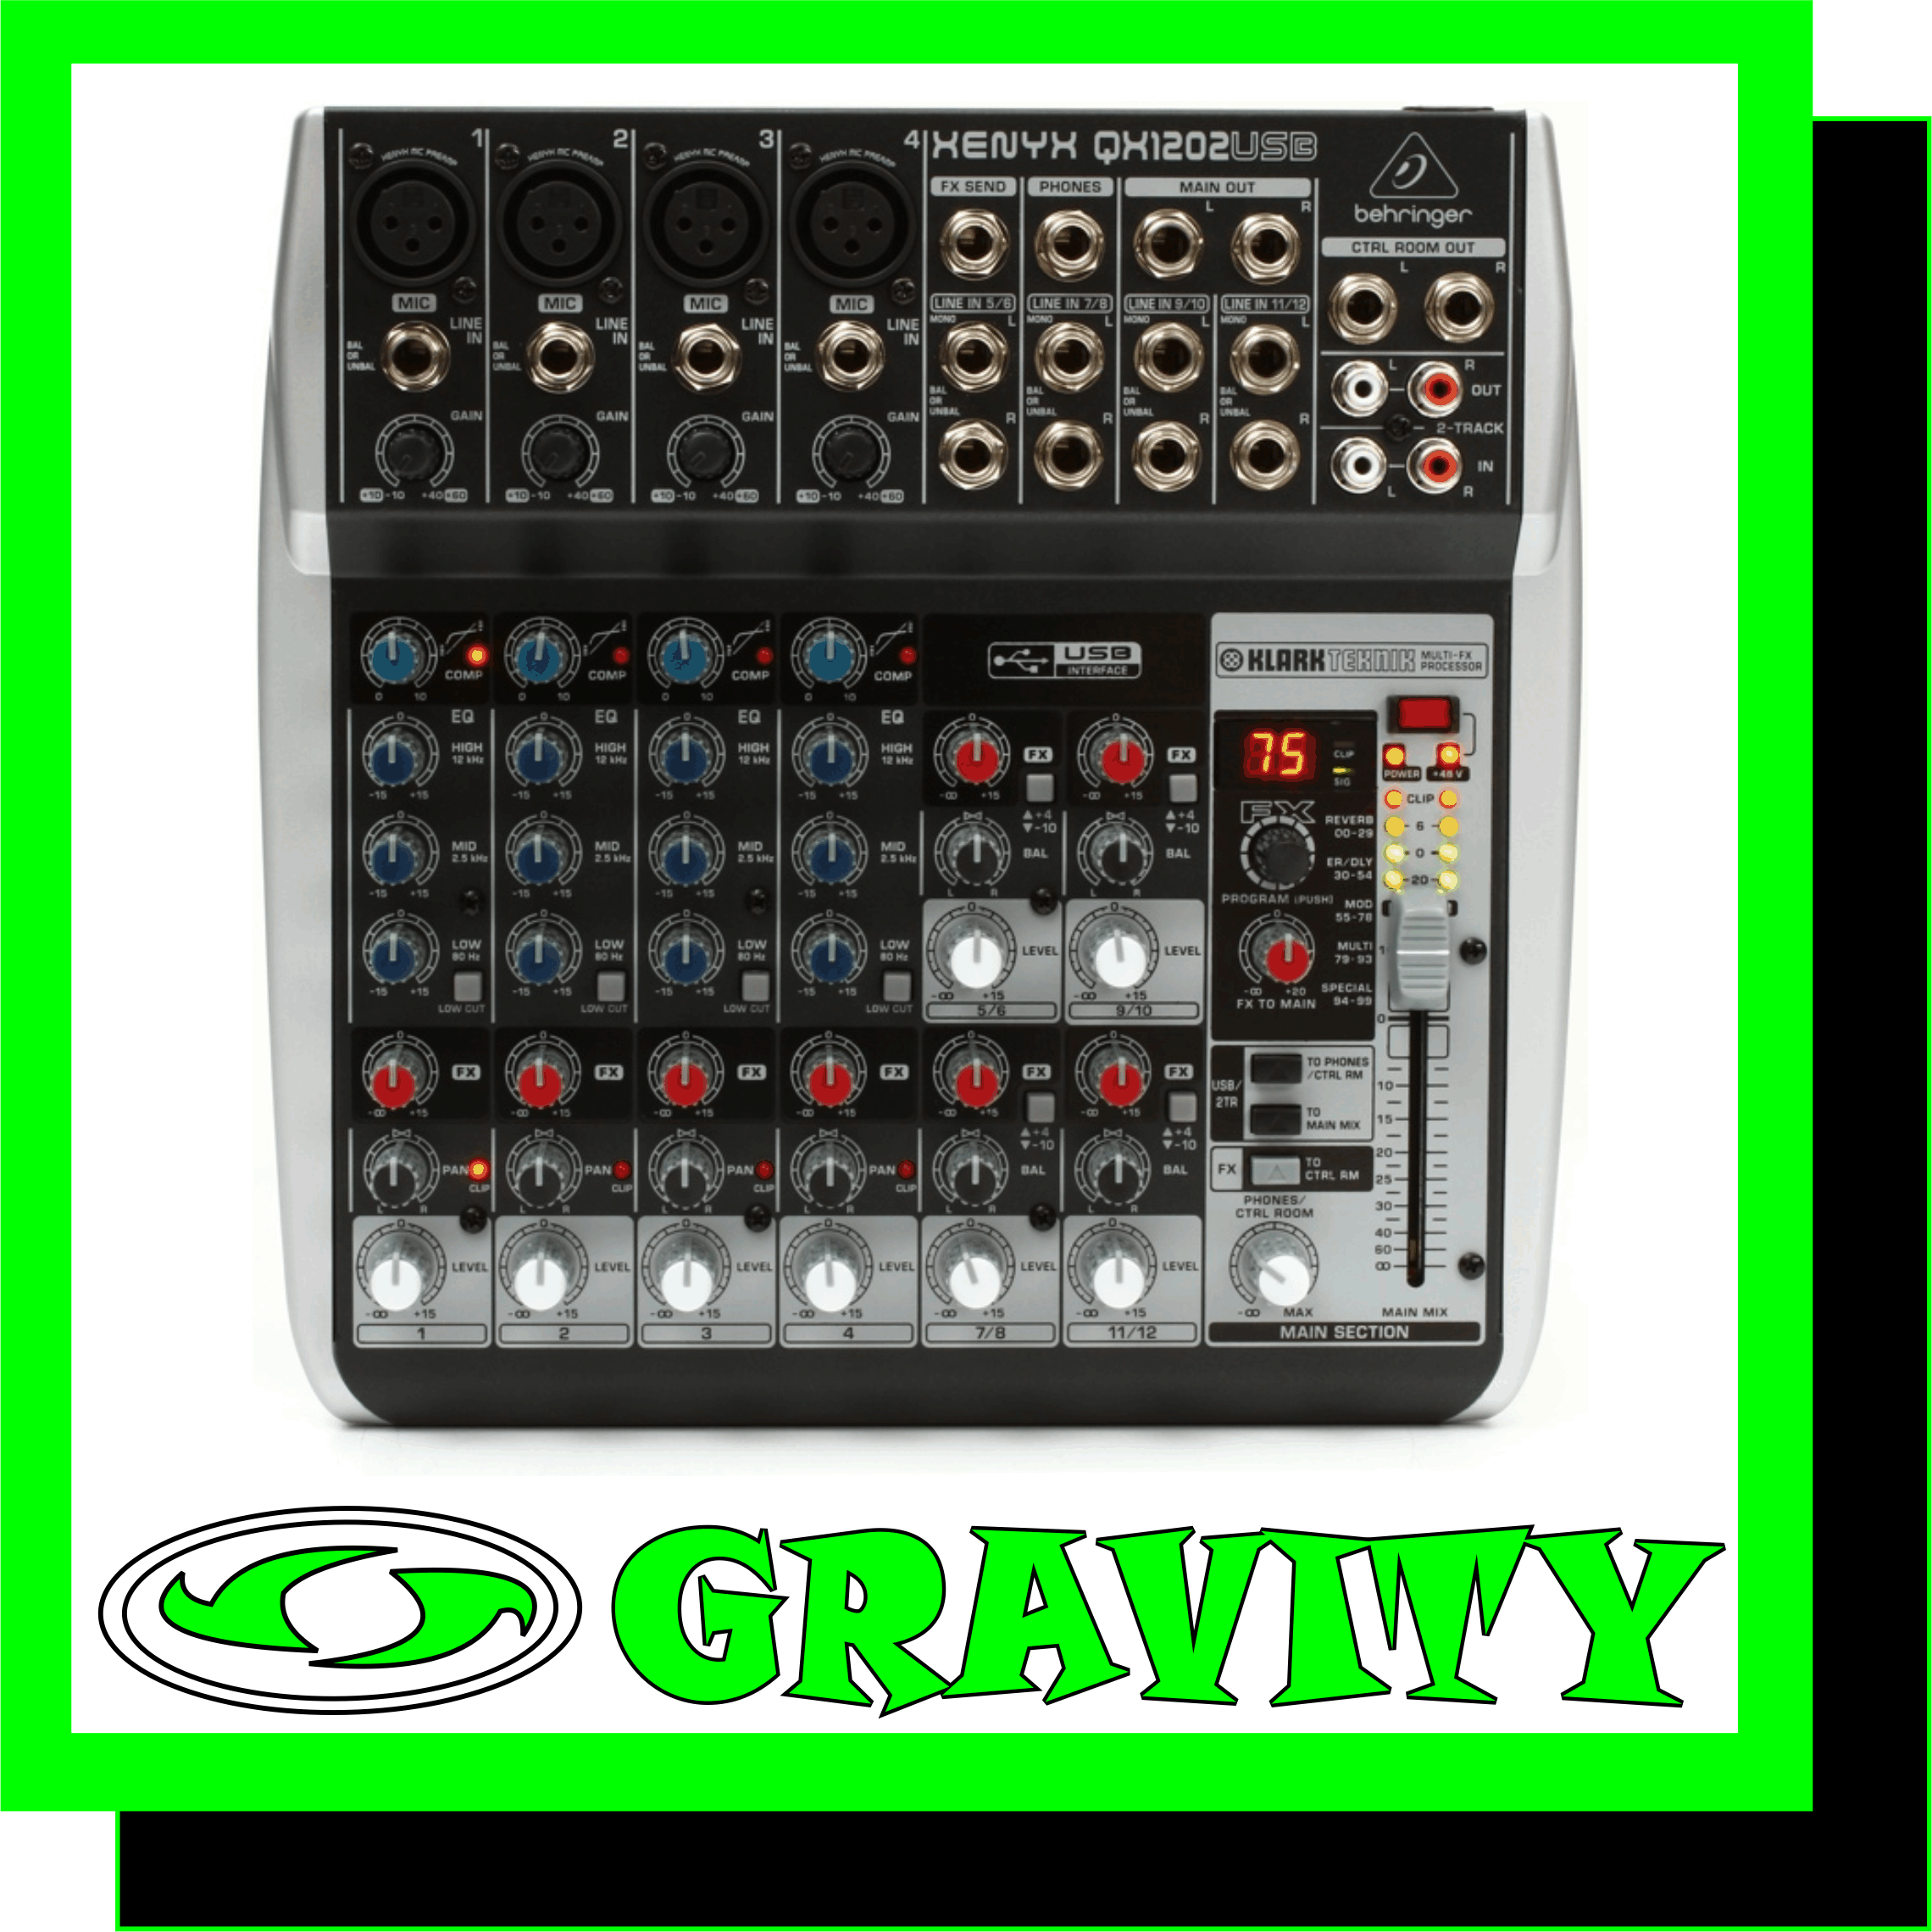 Behringer XENYX QX1202USB 12 input Mixer   Product Features: -Premium ultra-low noise, high headroom analog mixer -4 state-of-the-art XENYX Mic Preamps comparable to stand-alone boutique preamps -Studio-grade compressors with super-easy “one-knob” functionality and control -LED for professional vocal and instrumental sound -Ultra-high quality KLARK TEKNIK FX processor with 100 presets including reverb, -chorus, flanger, delay, pitch shifter and various multi-effects -Built-in stereo USB/Audio Interface to connect directly to your computer. Free -audio recording, editing and podcasting software plus 150 instrument/effect -plug-ins downloadable at behringer.com -Neo-classic “British” 3-band EQs for warm and musical sound -FX send control per channel for internal FX processor and/or as external send -Main mix outputs plus separate control room, phones and 2-Track outputs -2-Track inputs assignable to main mix or control room/phones outputs -High-quality components and exceptionally rugged construction ensure long life -Conceived and designed by BEHRINGER Germany  The compact QX1202USB mixer allows you to effortlessly achieve premium-quality sound, thanks to its 4 onboard studio-grade XENYX Mic Preamps and ultra-musical British channel EQs. And our easy-to-use one-knob compressors provide total dynamic control for the ultimate in punch and clarity, while respecting all the power and emotion you pack into every note. Add to this, the sweet forgiveness of our British-style EQs and a KLARK TEKNIK 24-bit, dual engine FX processor with 100 presets including reverb, chorus, flanger, delay, pitch shifter and various multi-effects and the QX1202USB becomes an incredibly versatile mixer for your live performances. But the XENYX QX1202USB isnt just designed to handle your live gigs; they also provide the state-of-the-art tools you need to make stunning, professional-quality recordings. Along with their built-in USB/audio interfaces, the QX1202USB comes with all the recording and editing software needed to turn your computer system into a complete, high-performance home recording studio. BUY ONLINE